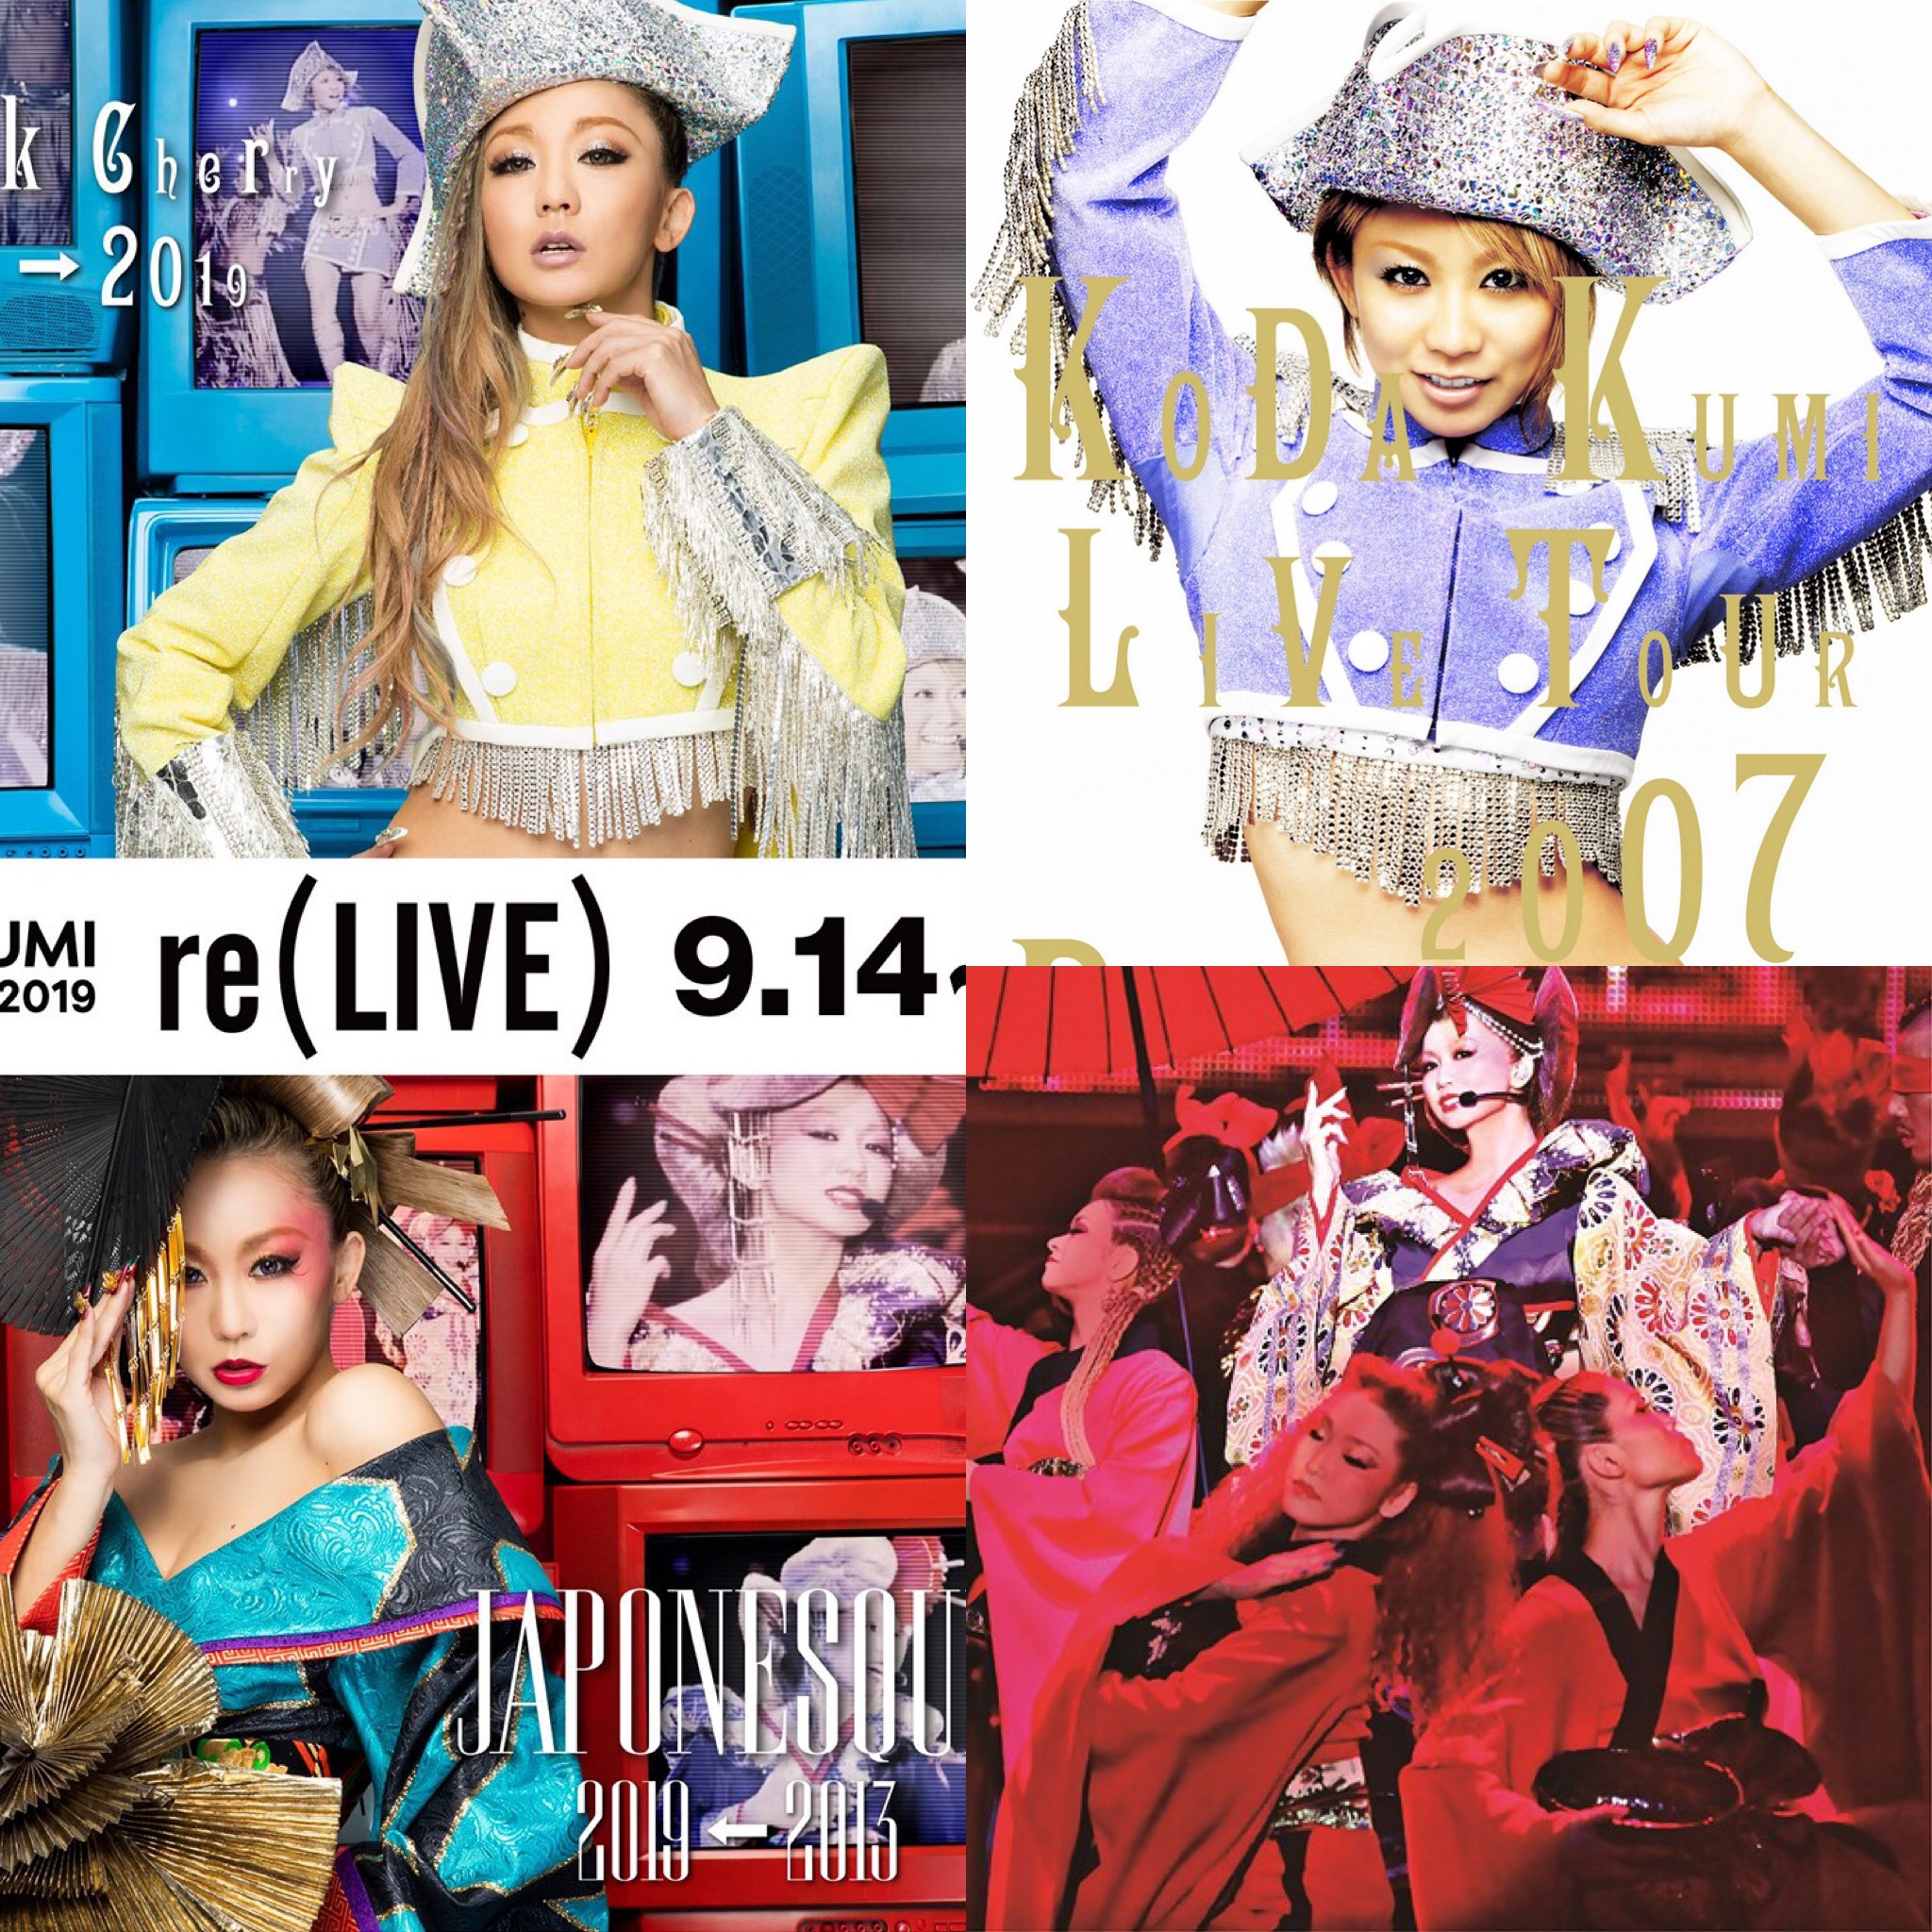 Koda Kumi to “re LIVE” her Black Cherry and JAPONESQUE tours